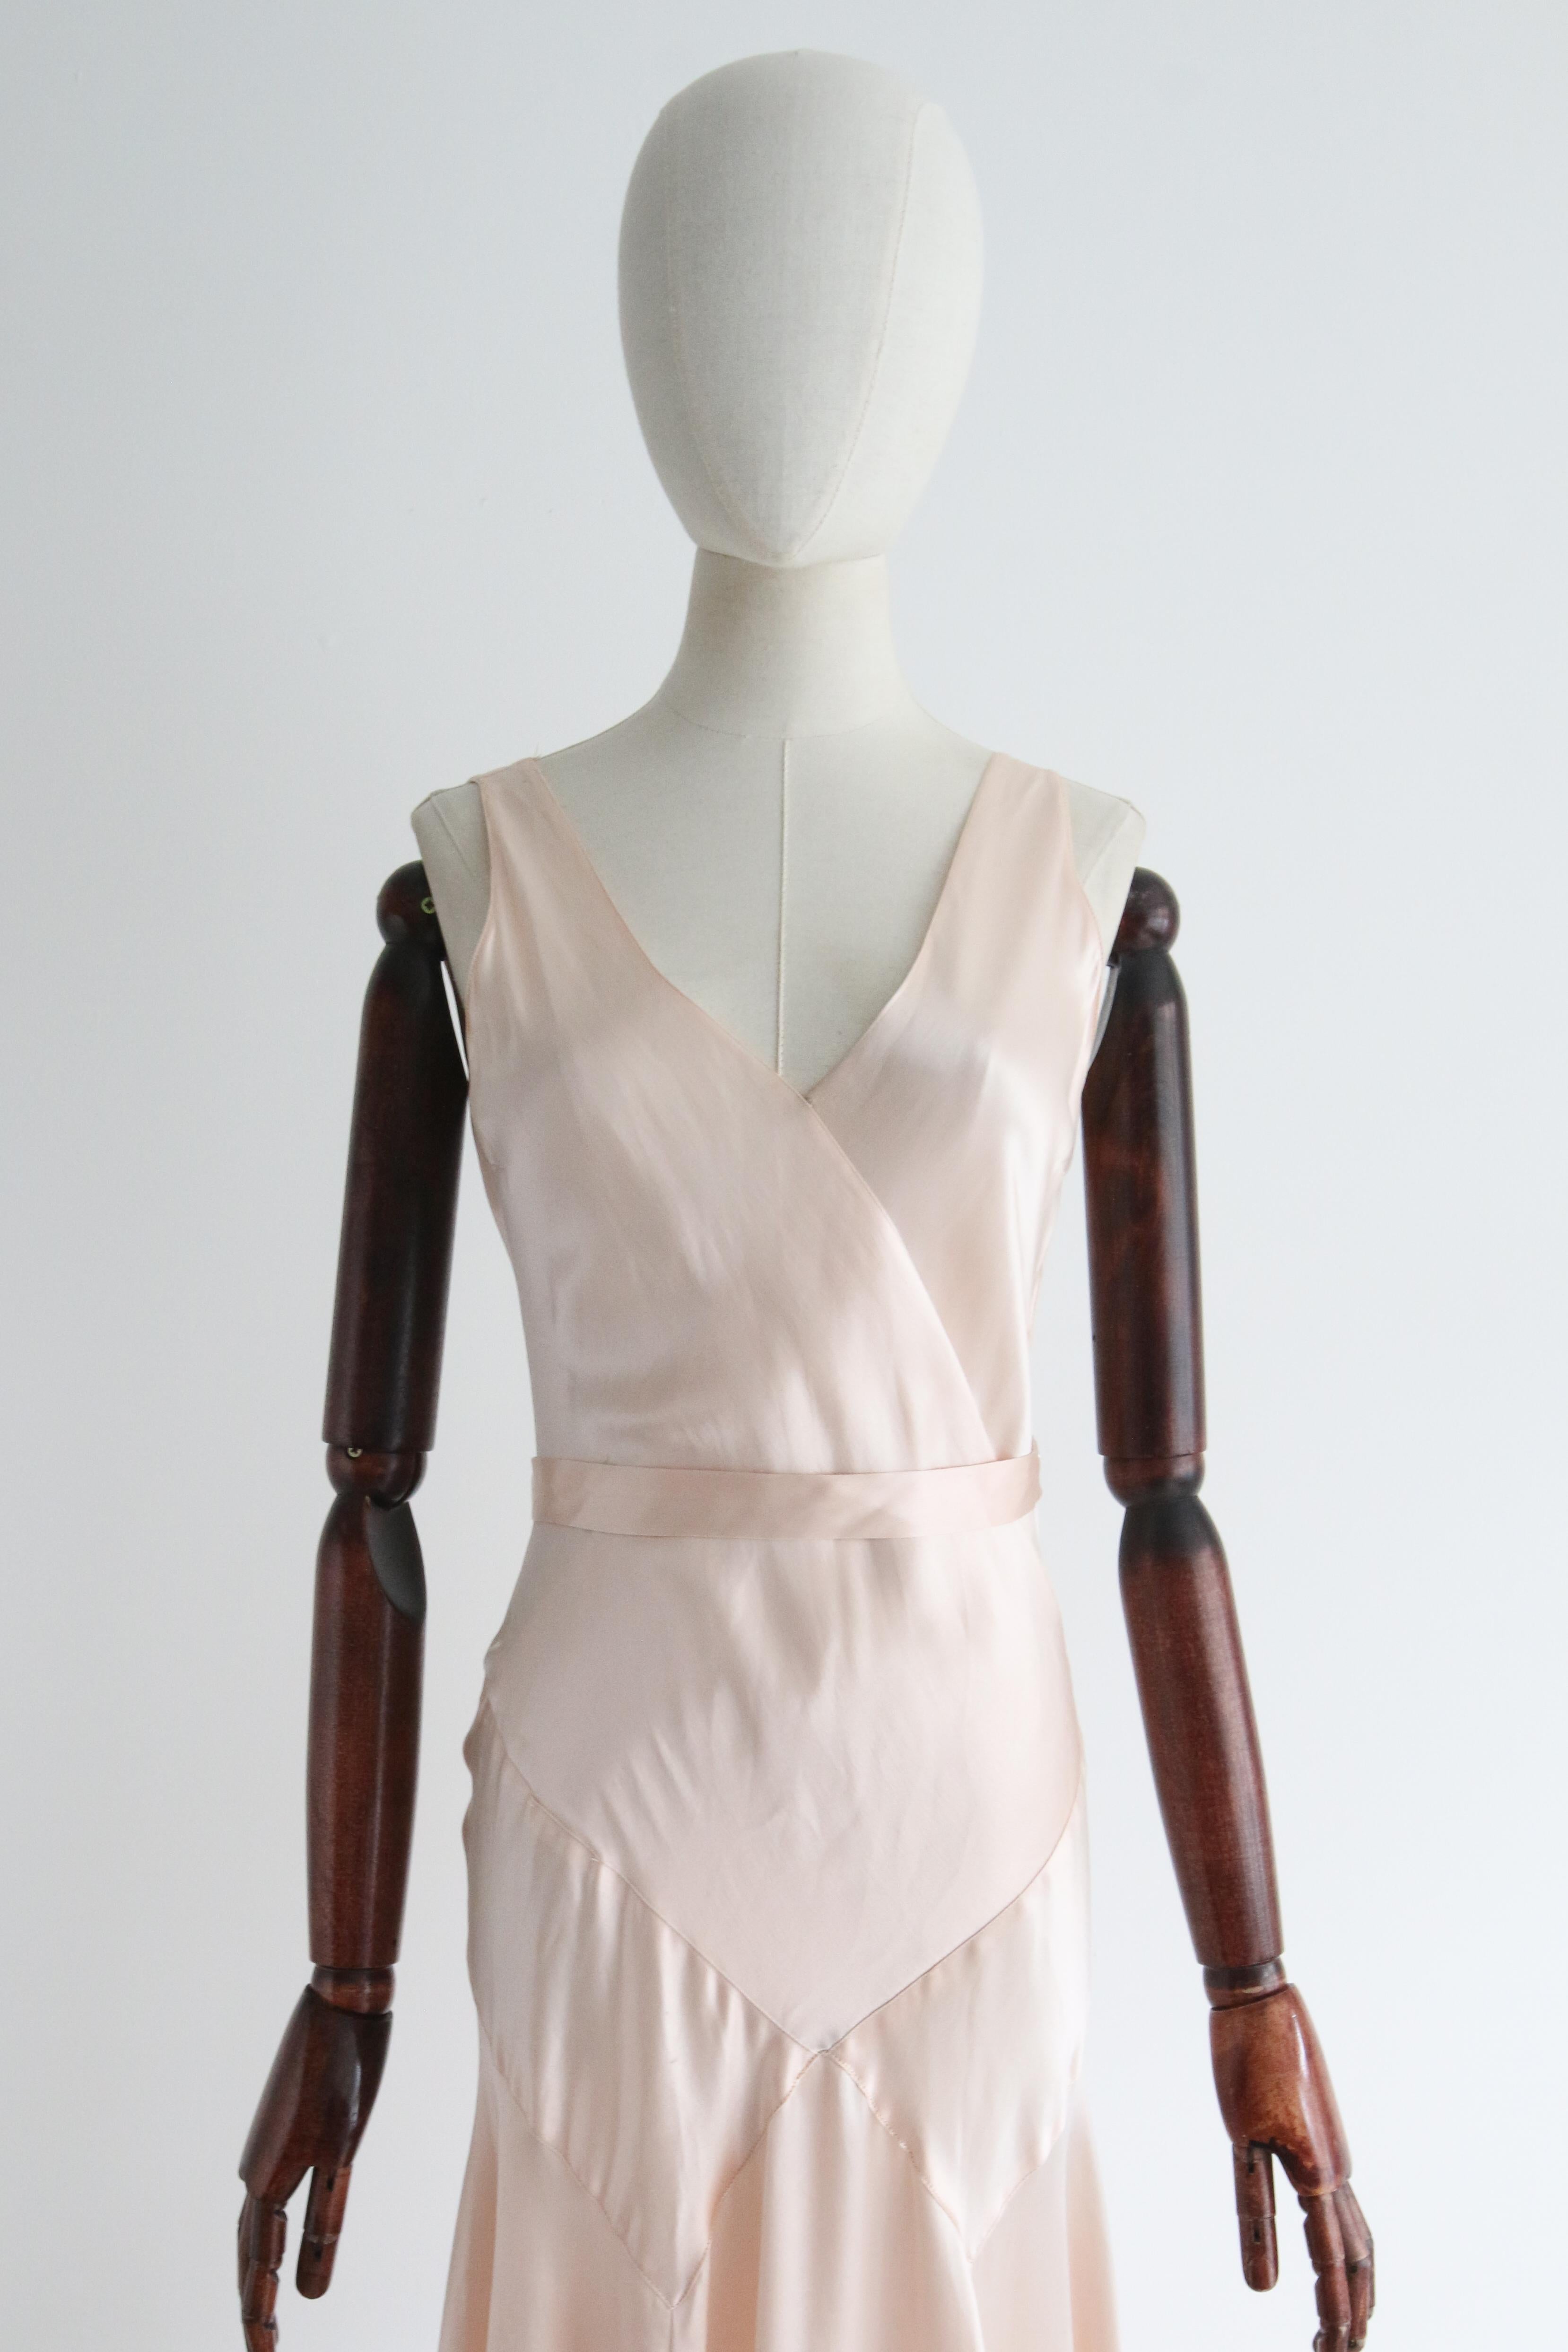 A true beauty to behold. This original 1930's dress, rendered in a soft ballerina pink satin, showcasing the incredible pointed seam designs of the 1930's, is a timeless beauty to behold. 

The V shaped cross over neckline of the dress, draws